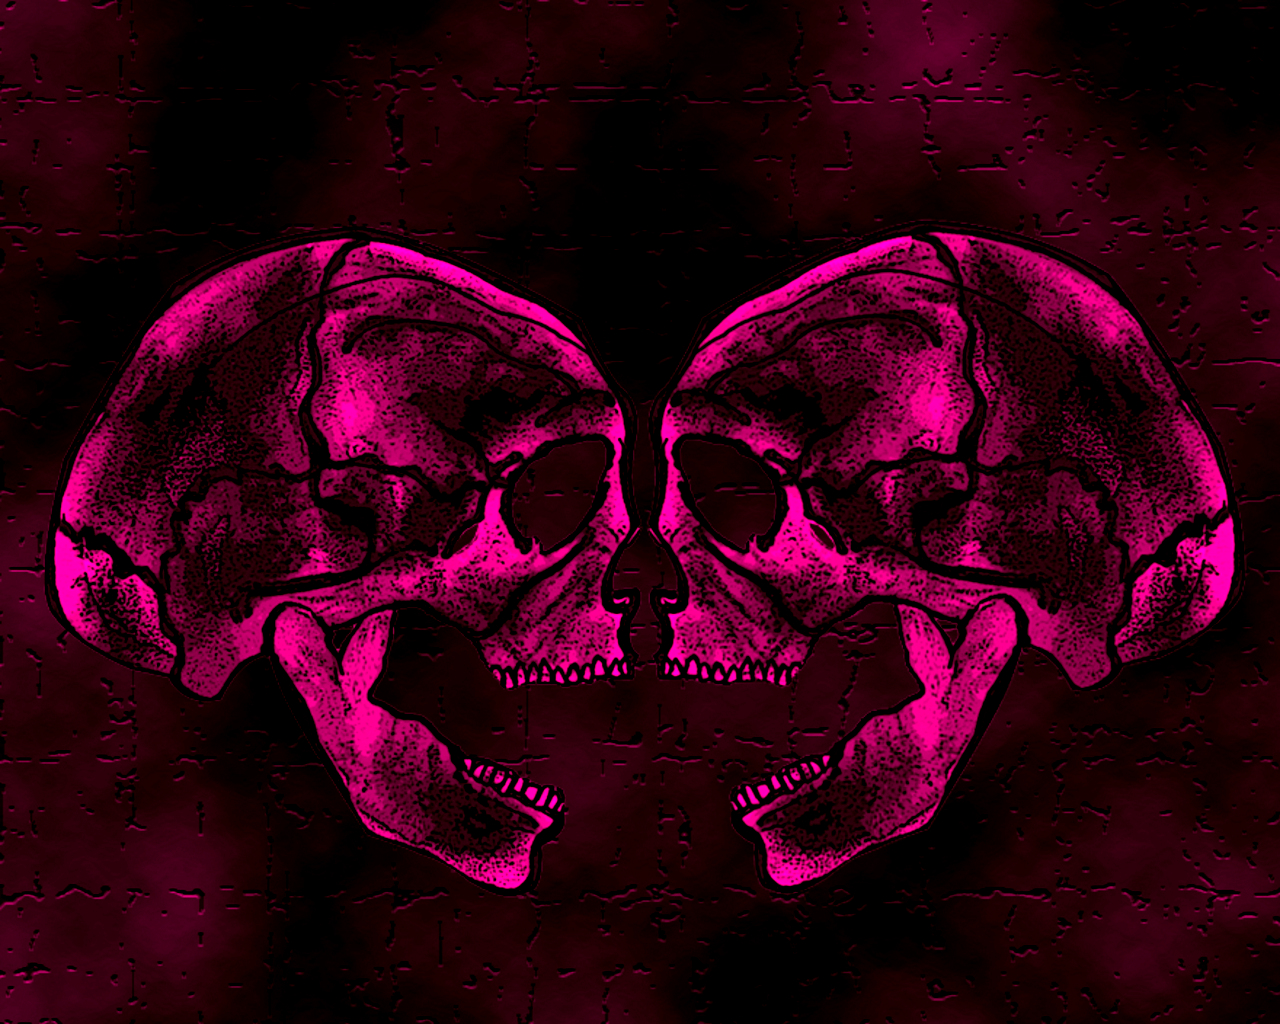 Related Pictures Hq Skull Horror Wallpaper